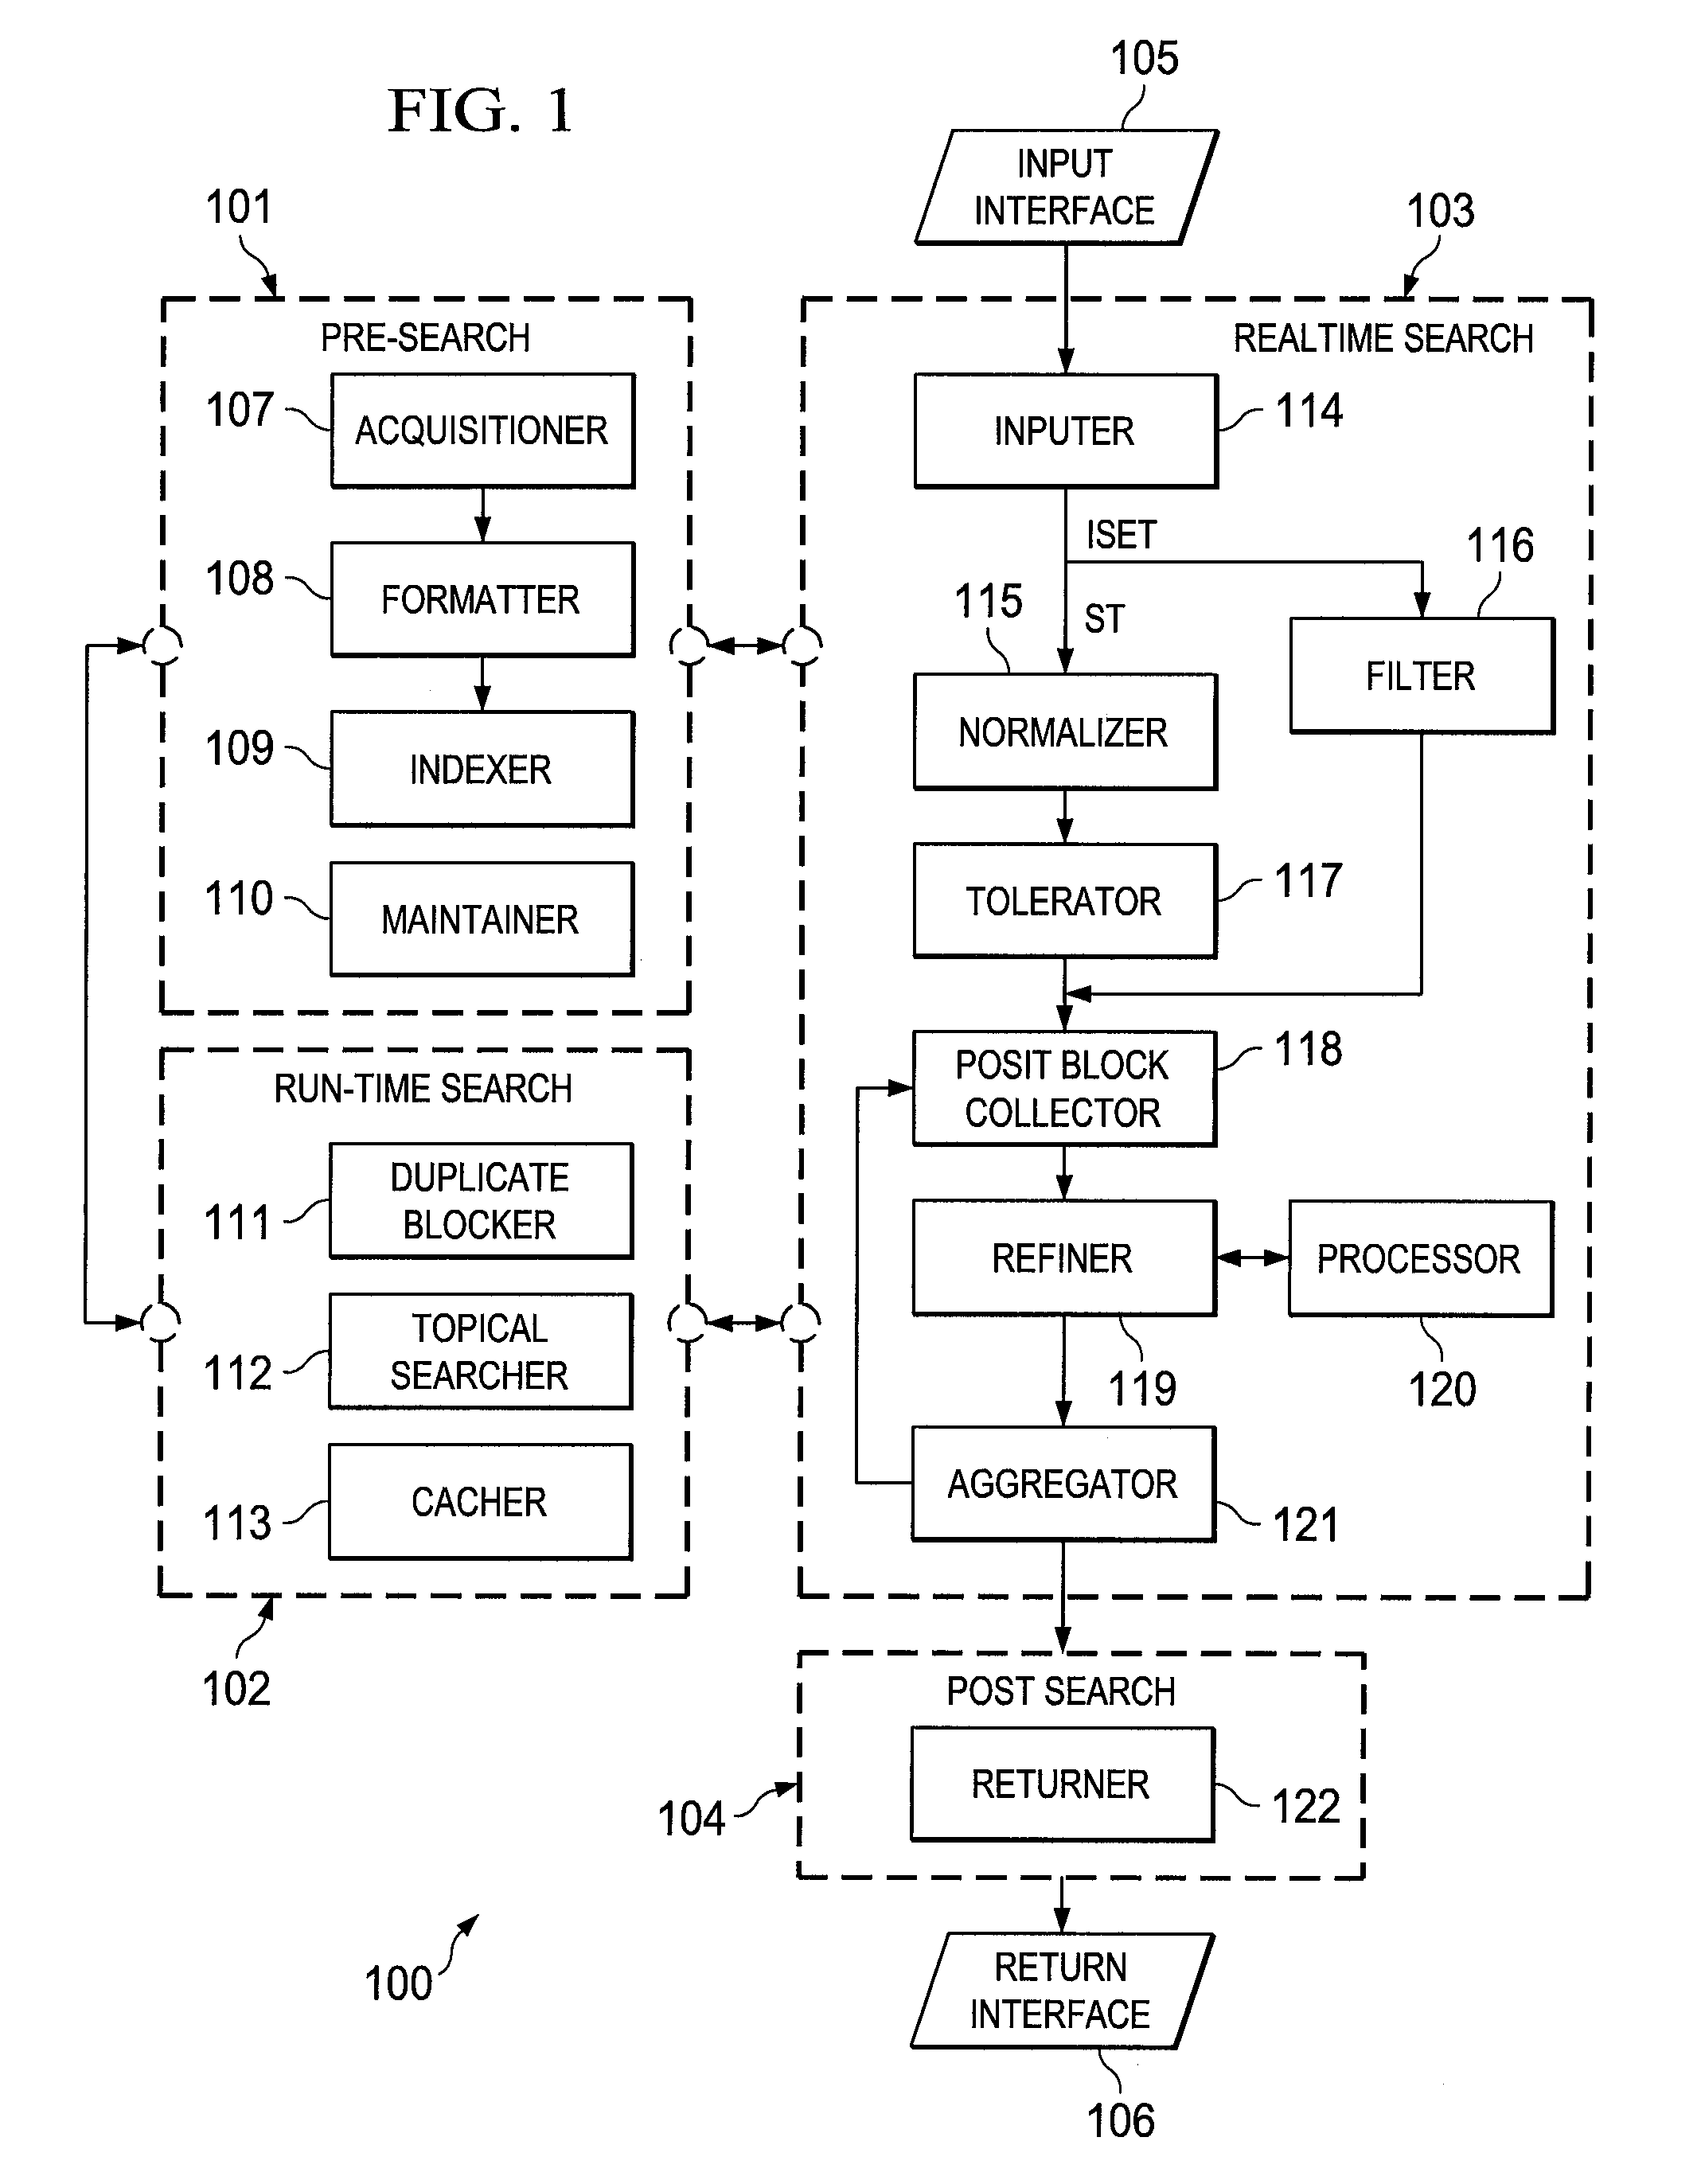 Systems and methods for a search engine having runtime components